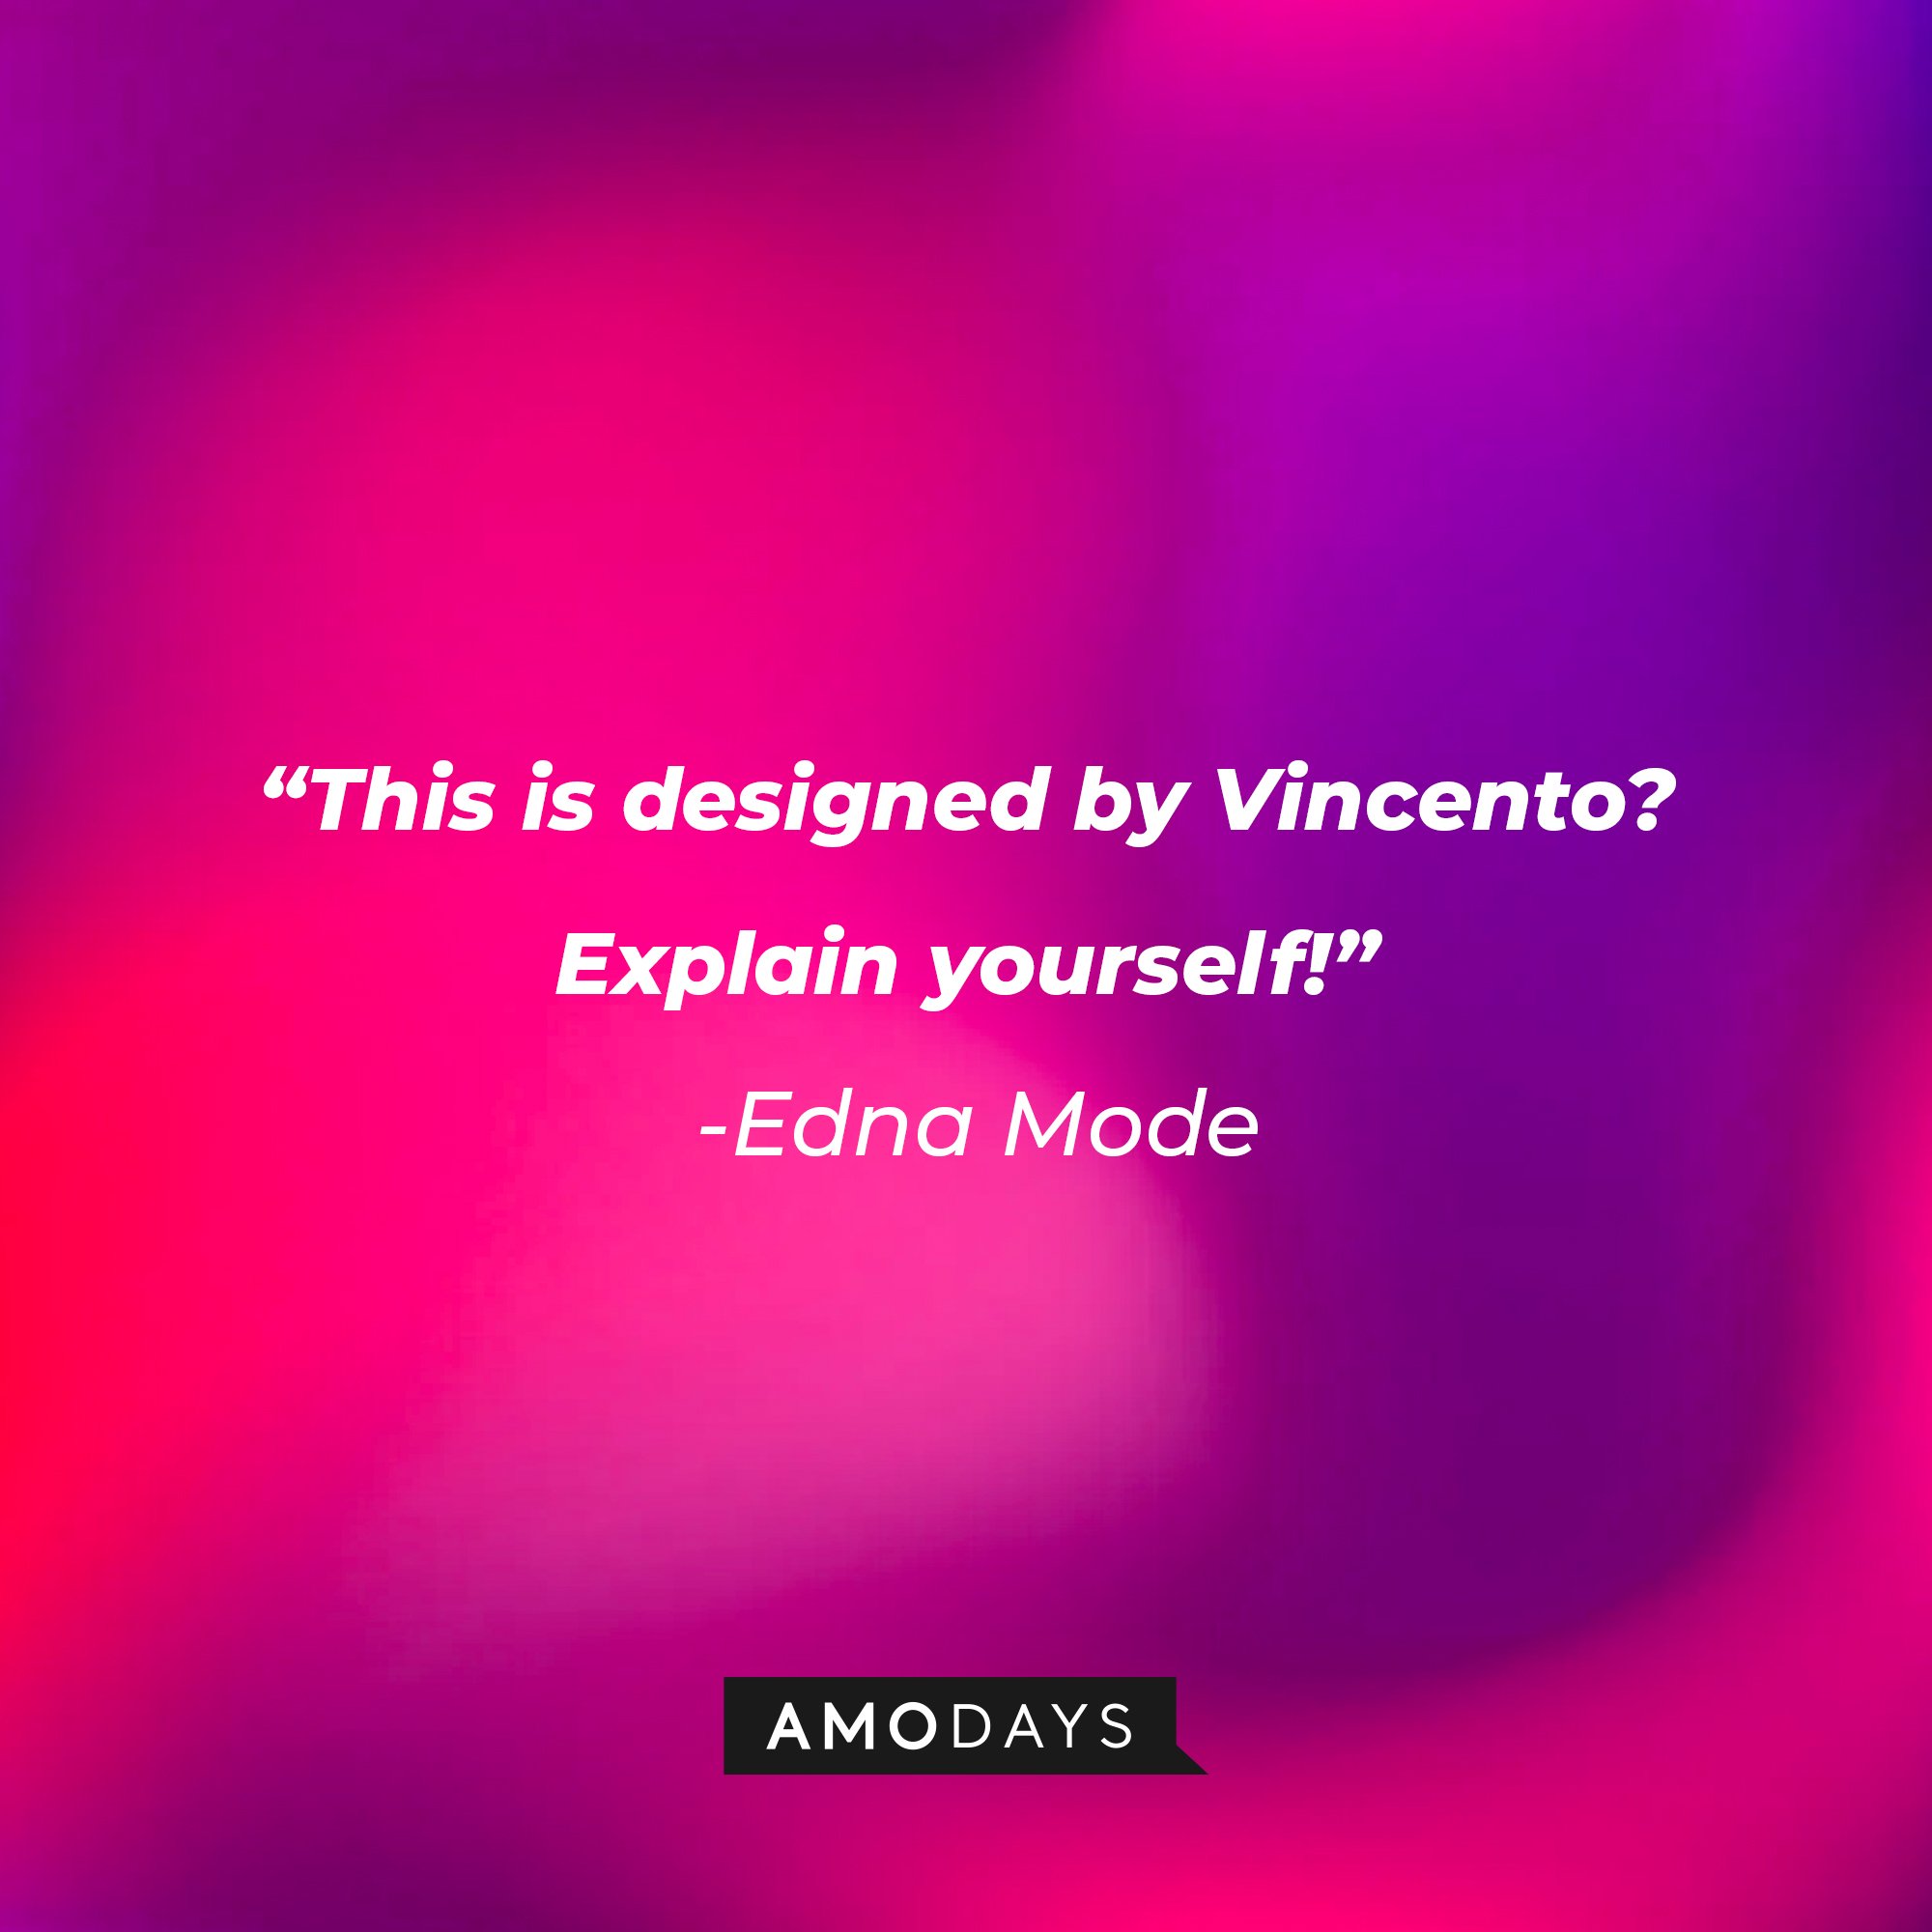 Edna Mode’s quote: "This is designed by Vincento? Explain yourself!" | Image: AmoDays